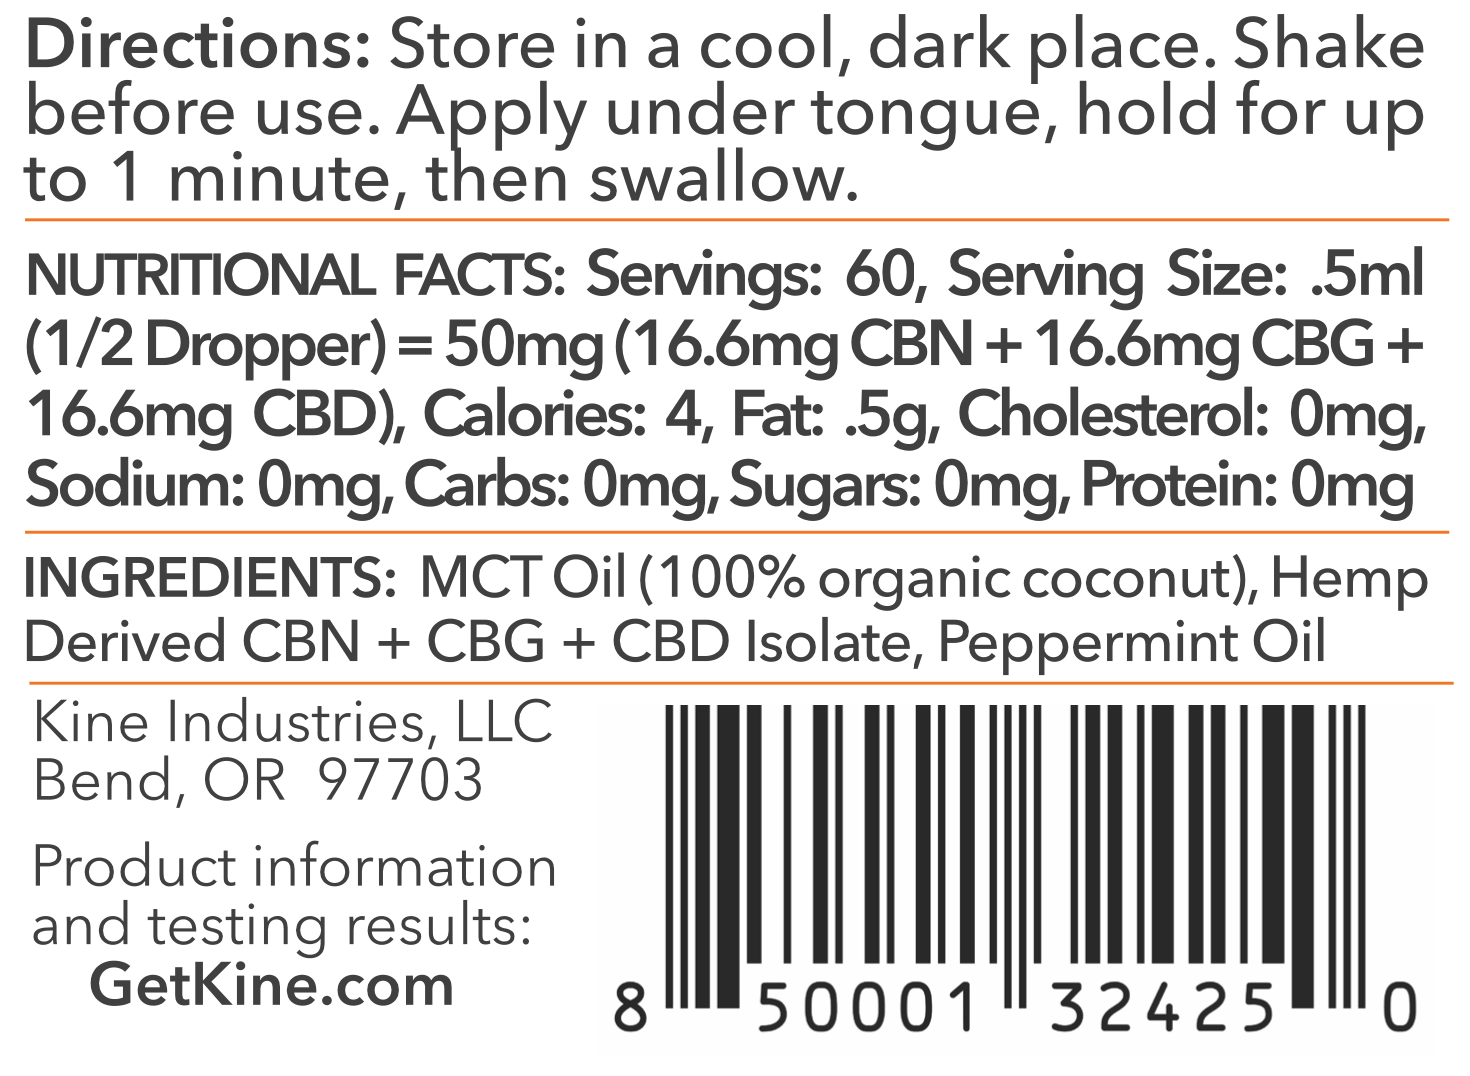 Kine Mint Flavored Organic CBN/CBG/CBD 1:1:1 ratio 3000mg tincture oil drops ingredients list and nutritional facts